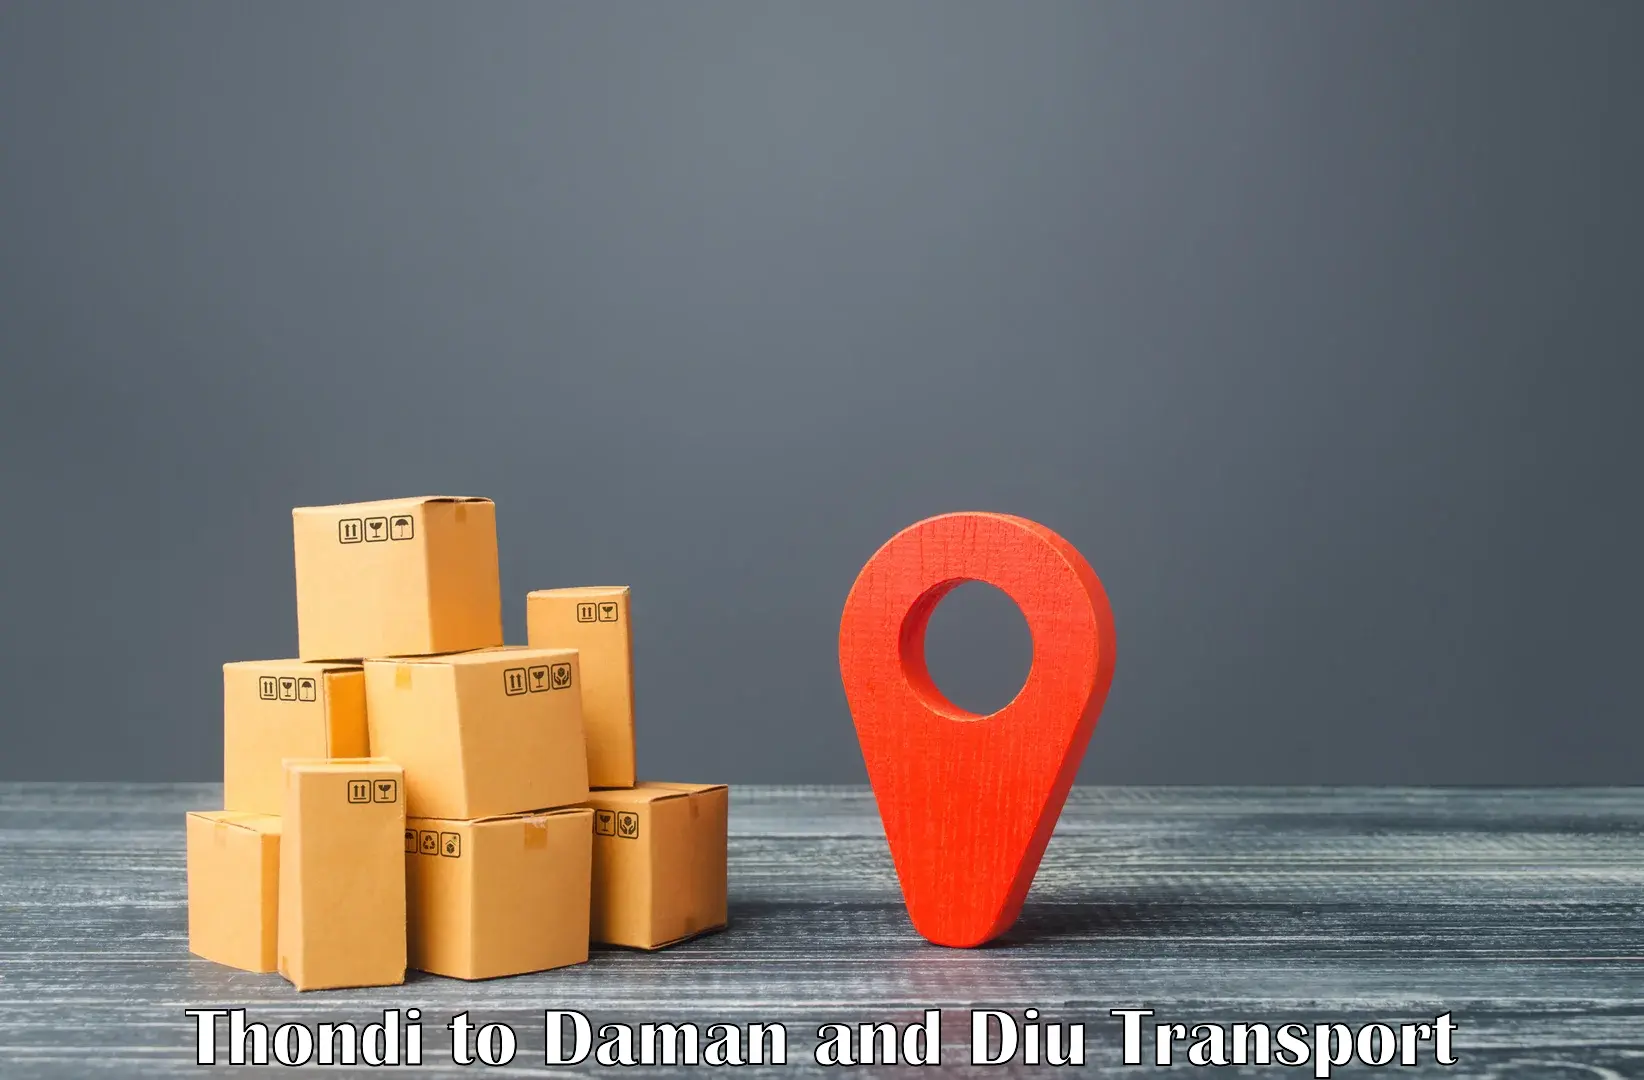 Parcel transport services Thondi to Diu